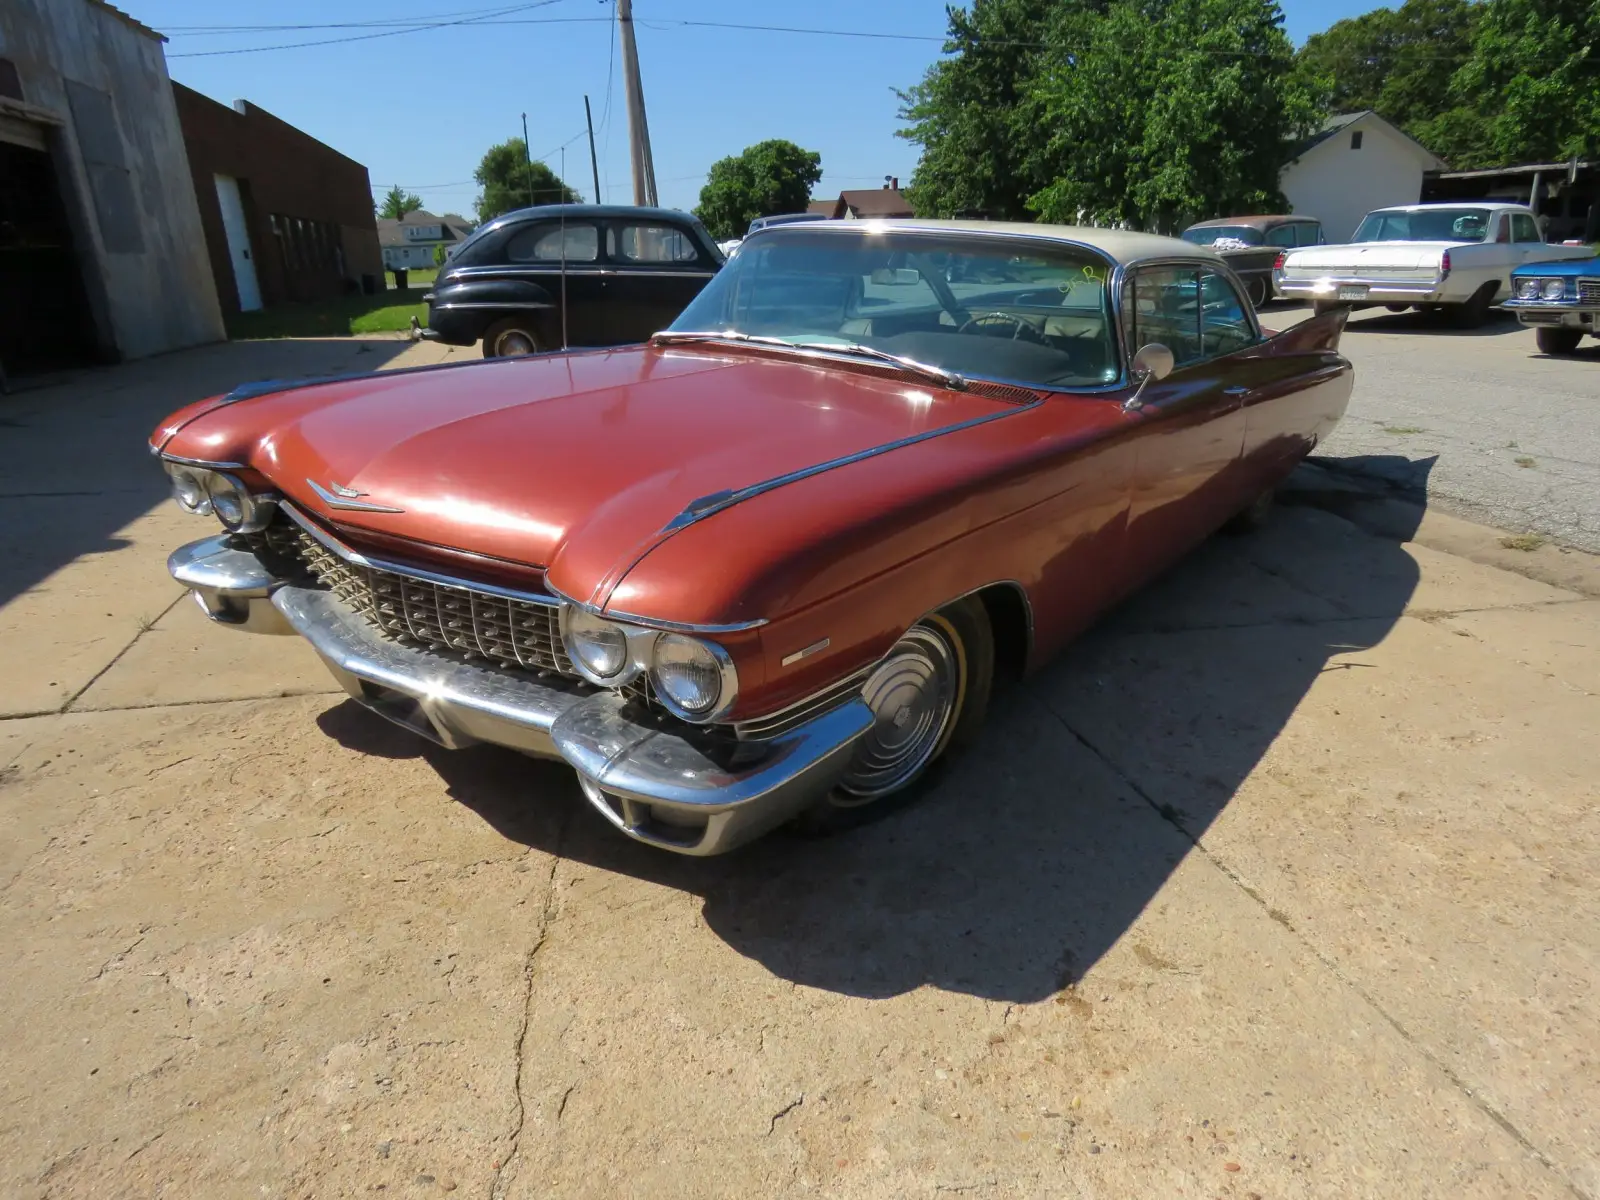 Top Tips for Finding a 1960 Cadillac Coupe DeVille for Sale